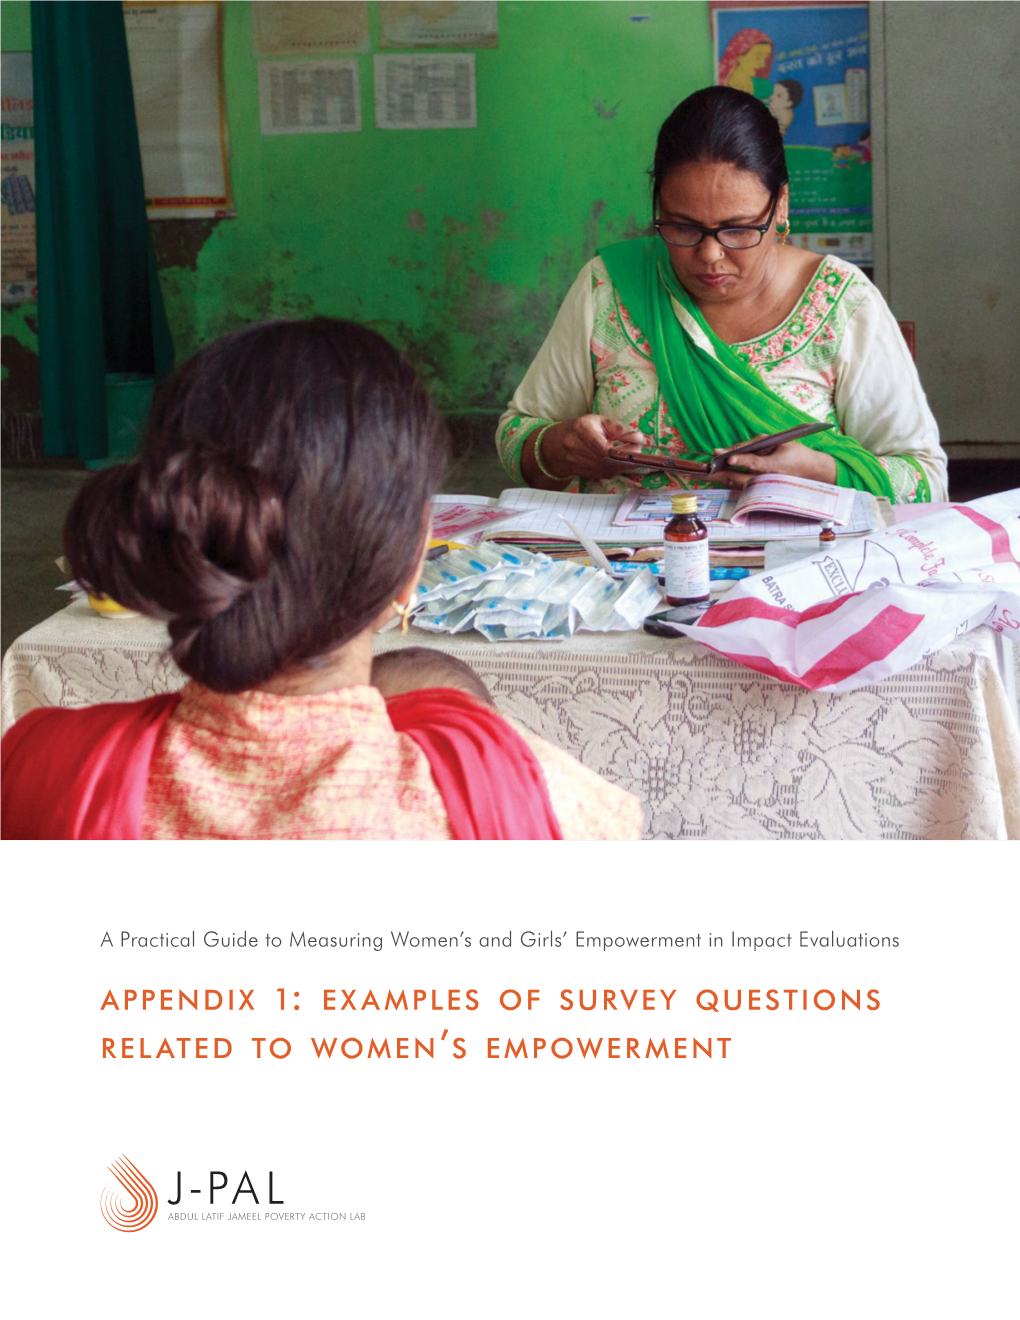 Examples of Survey Questions Related to Women's Empowerment